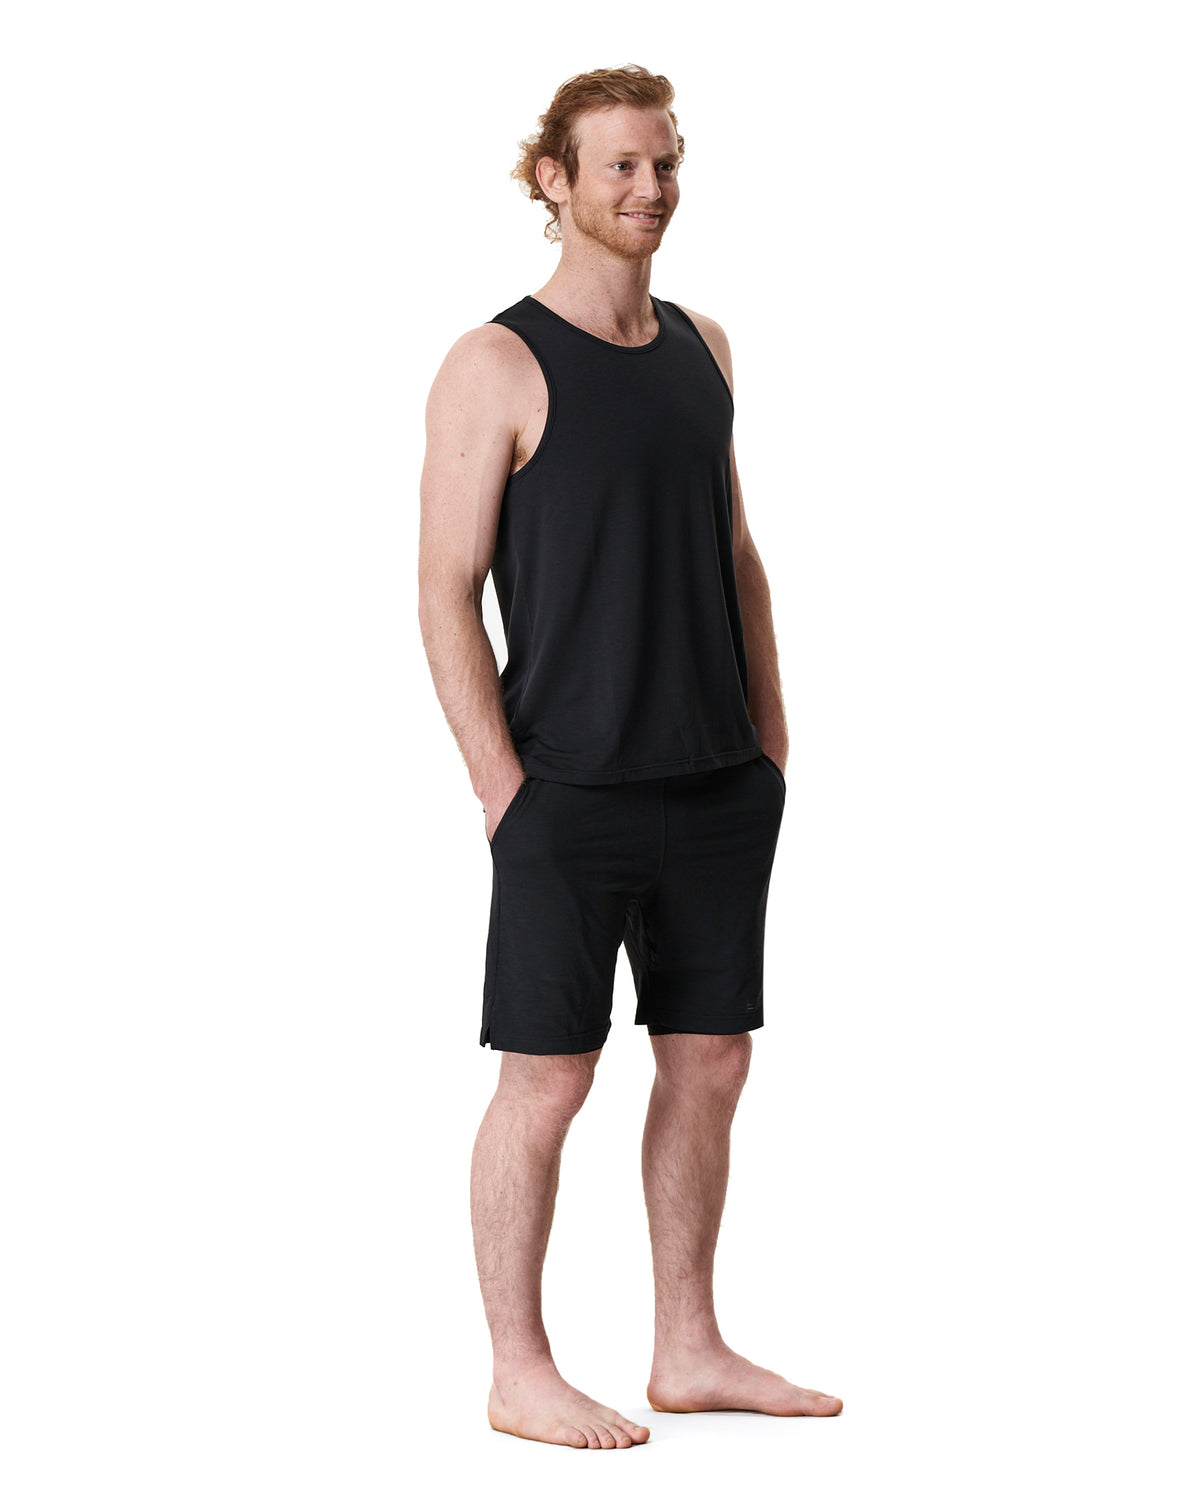 man wearing black yoga shorts and yoga top by warrior addict 